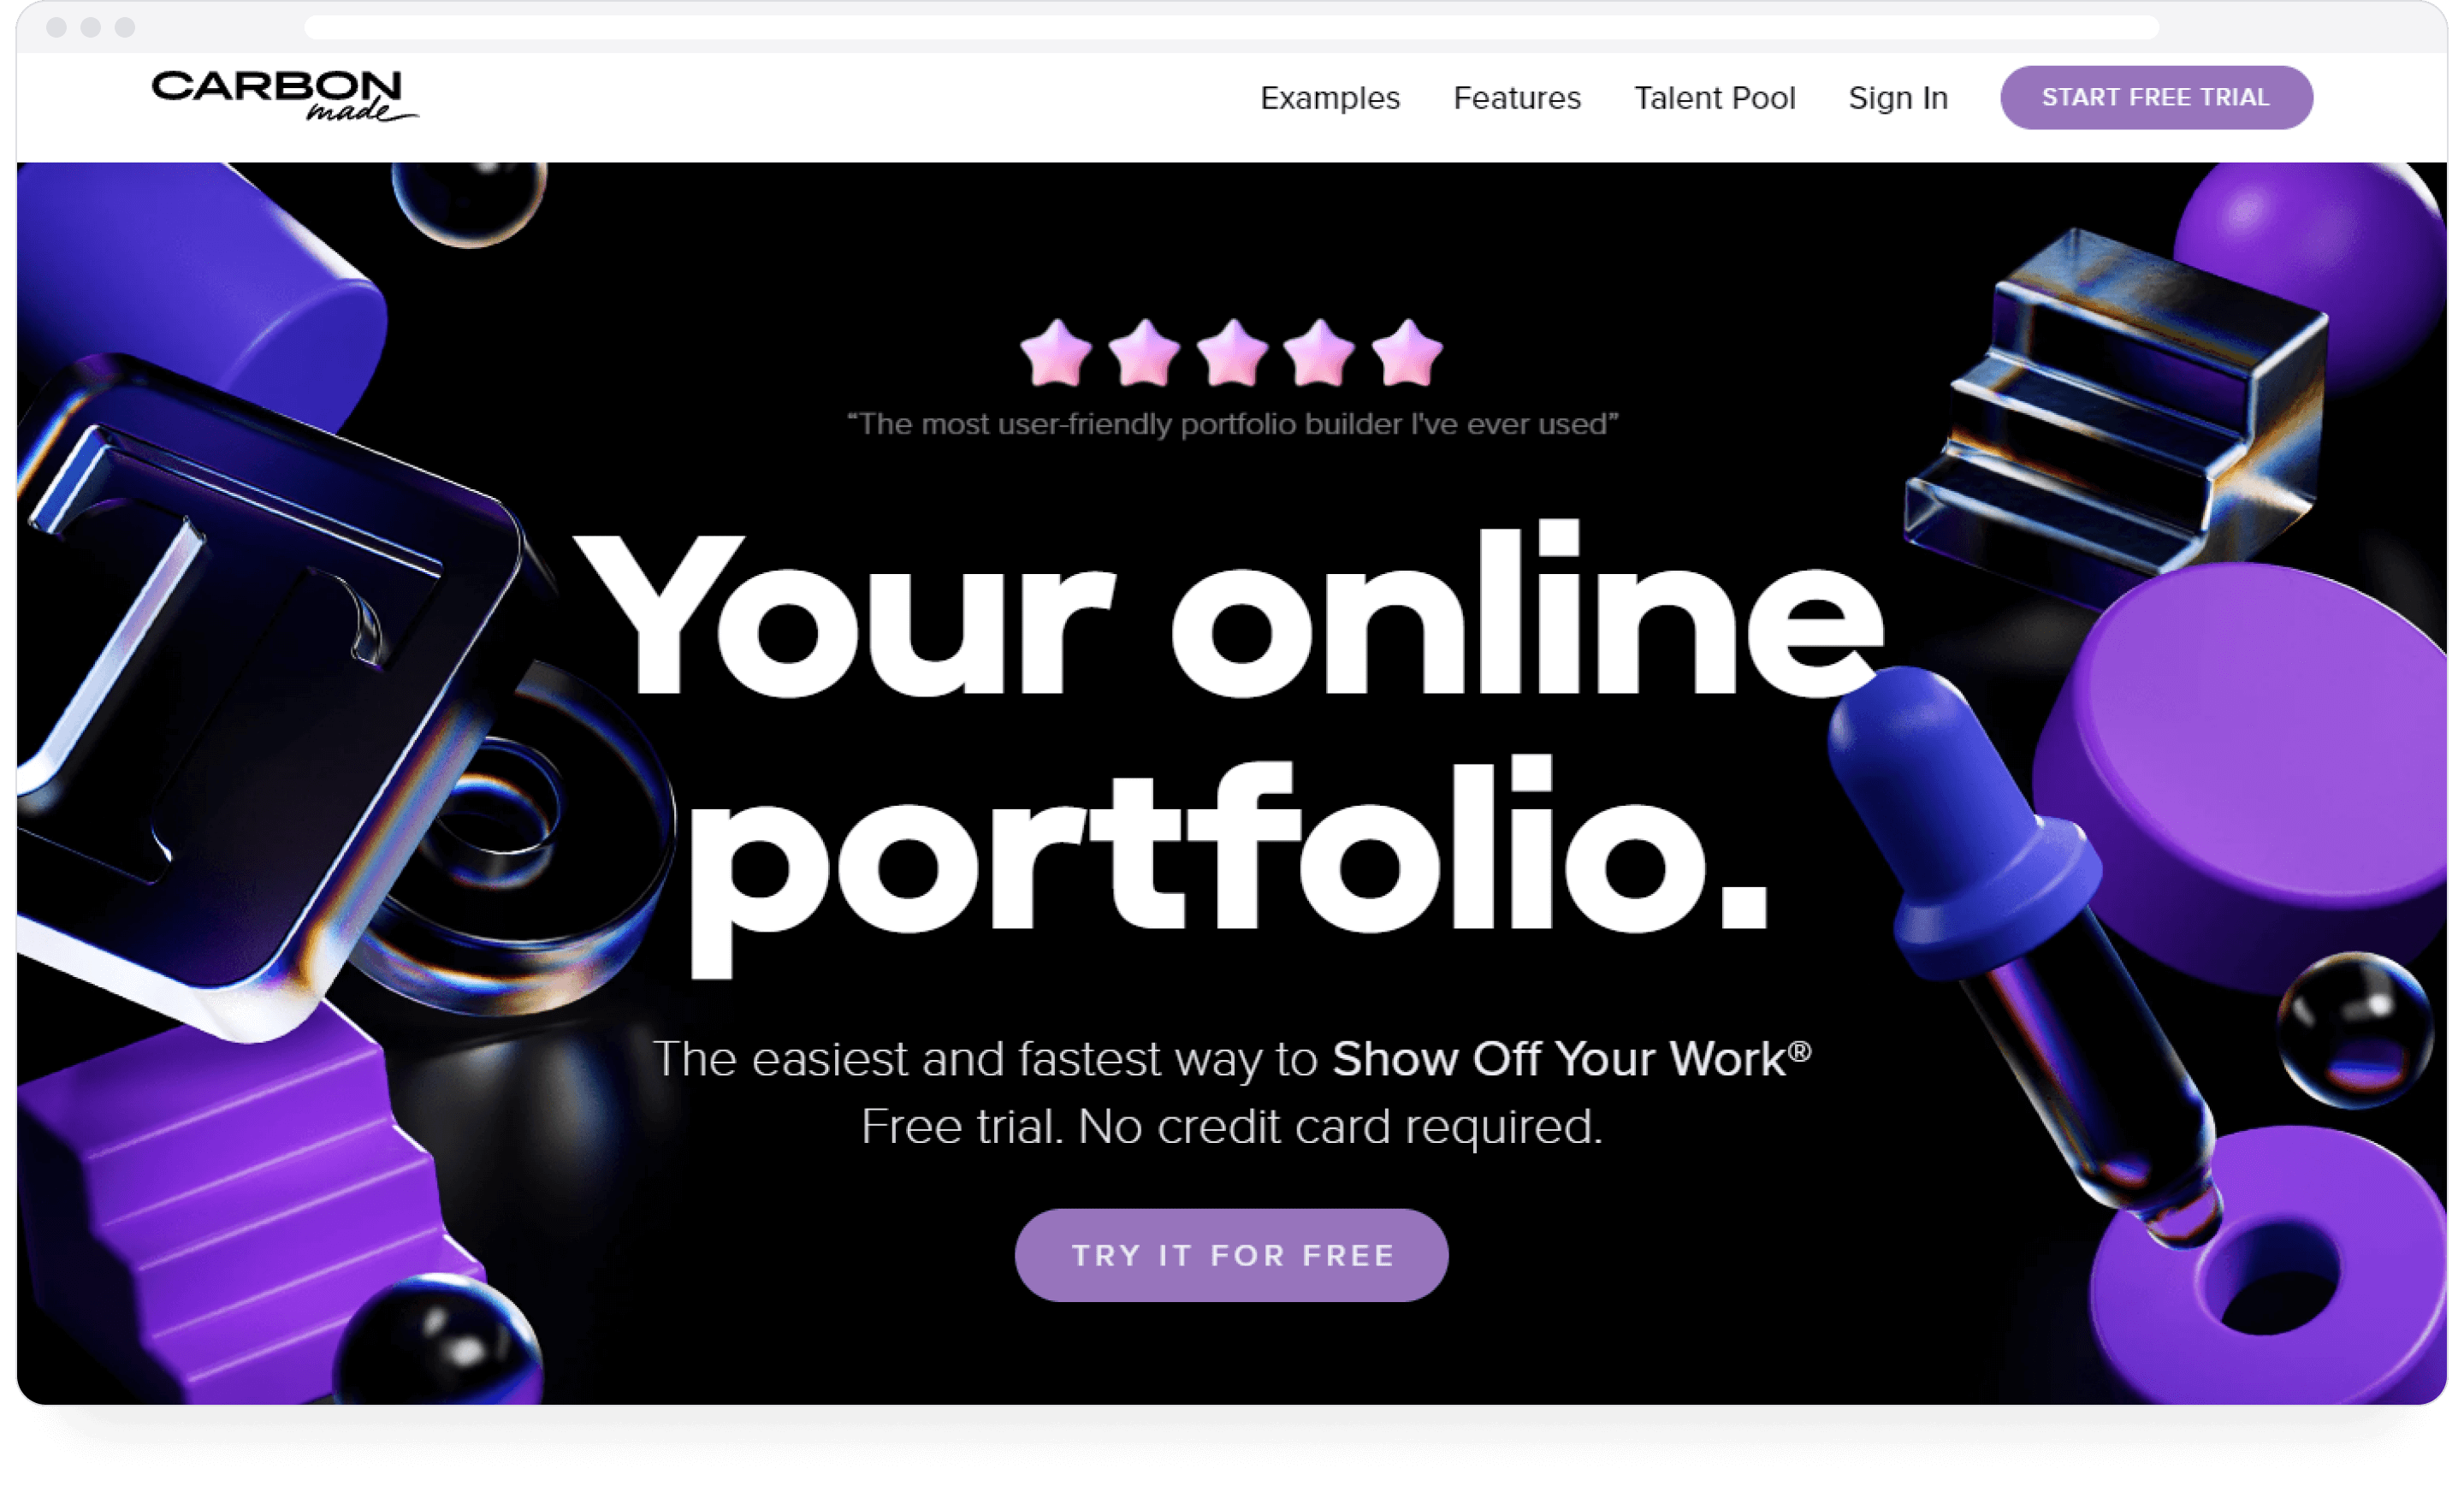 10 Top Writing Portfolio Websites for Freelance Writers in 2023